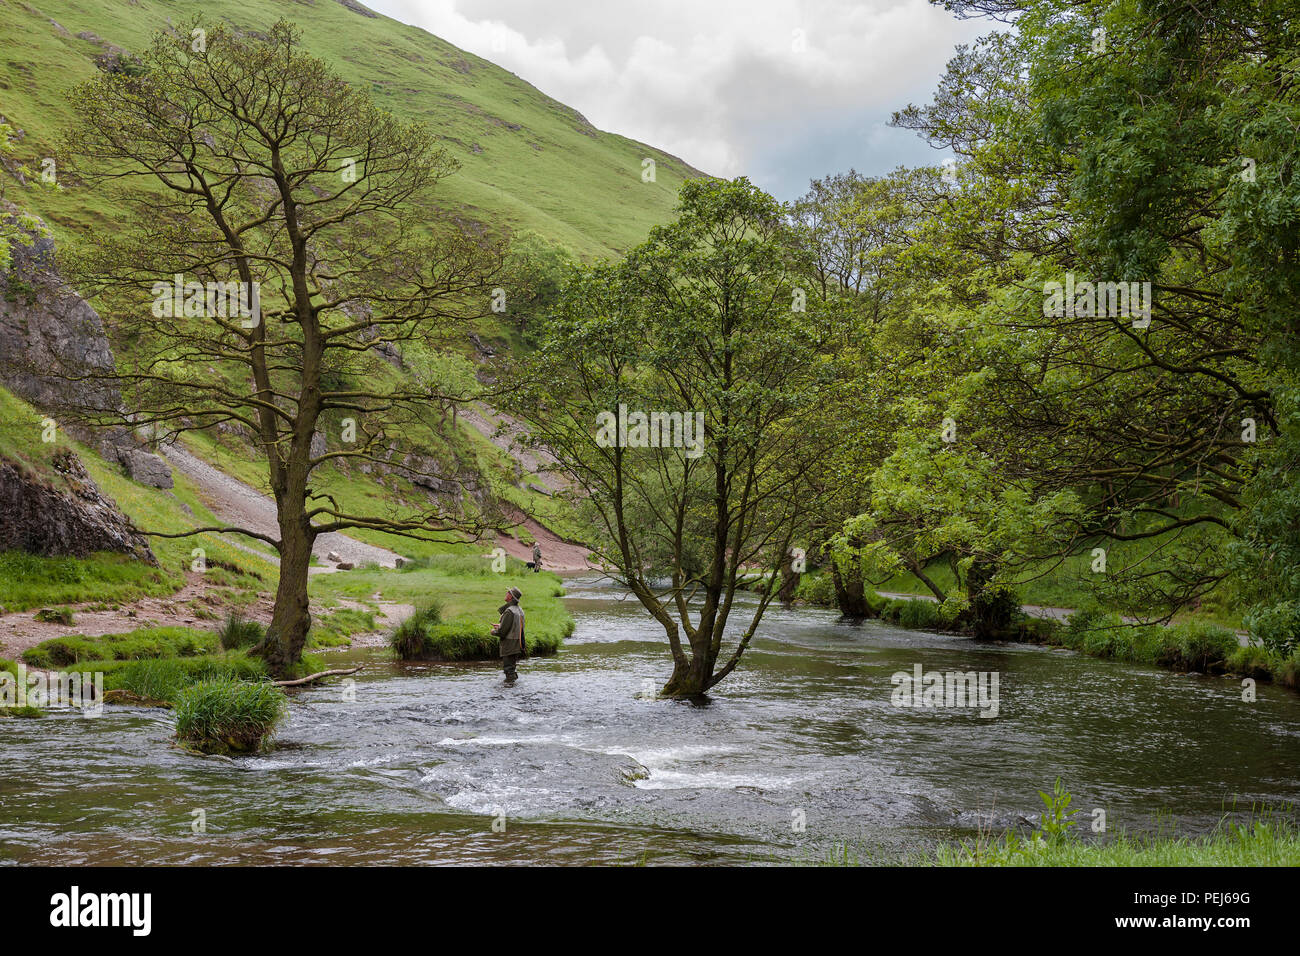 Fly-fishing on the River Dove near Thorpe Cloud, Dovedale, Derbyshire, UK Stock Photo